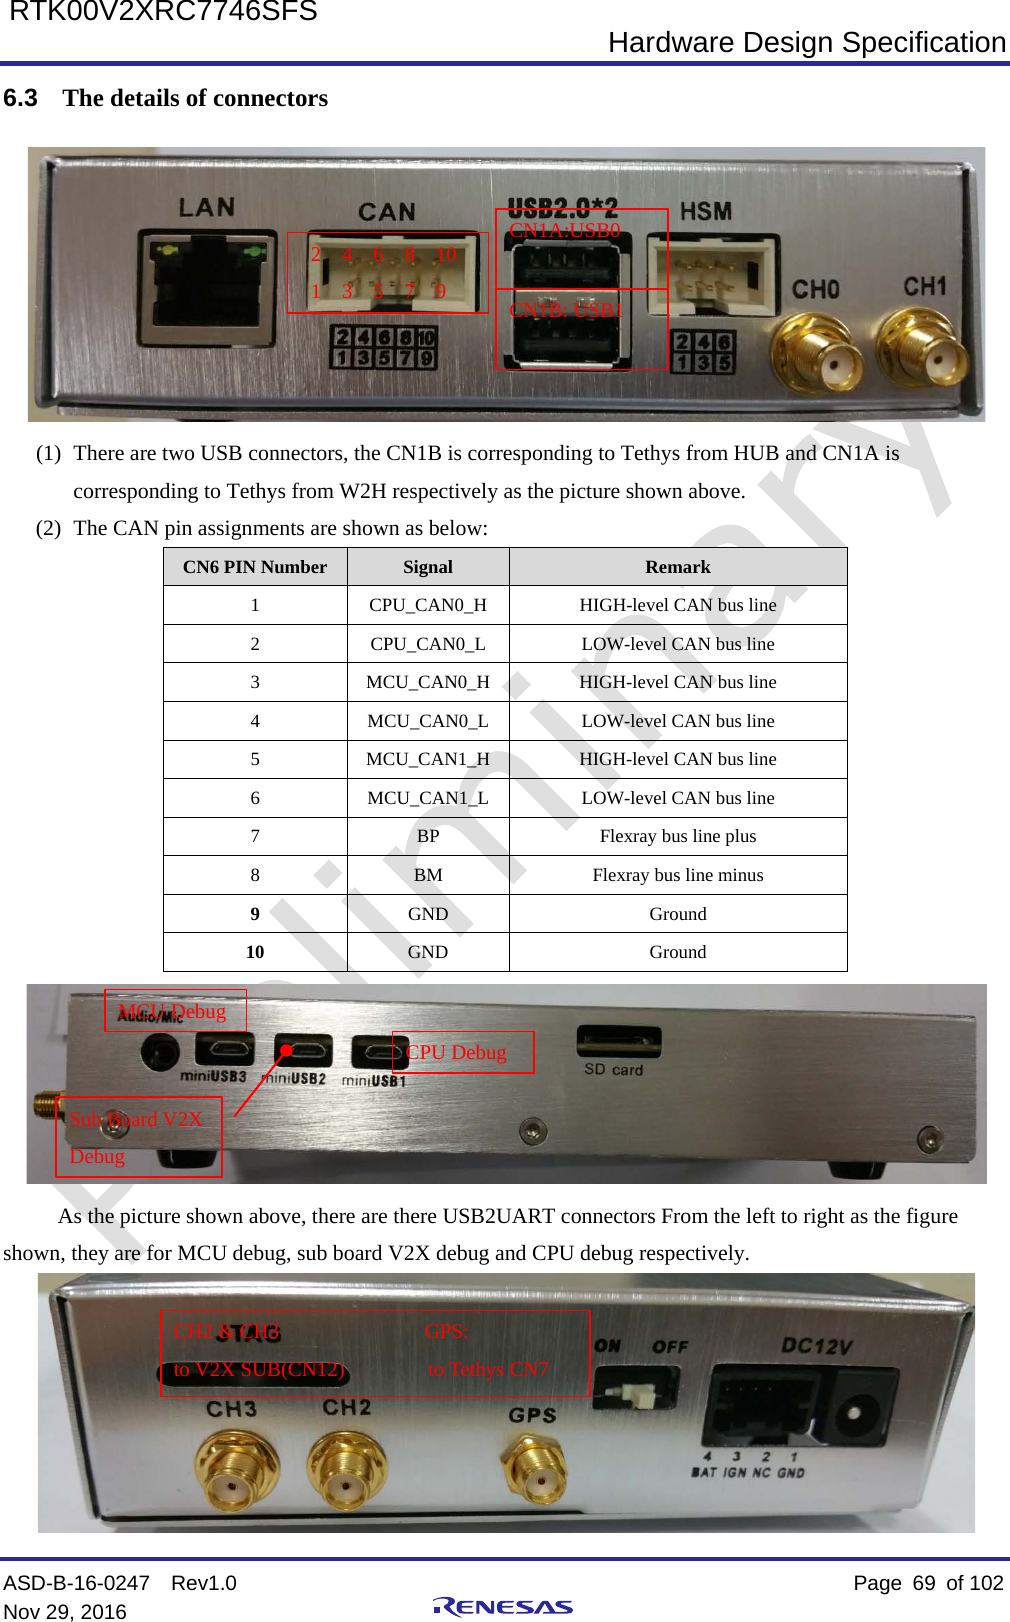  Hardware Design Specification ASD-B-16-0247  Rev1.0    Page  69 of 102 Nov 29, 2016     RTK00V2XRC7746SFS 6.3 The details of connectors    (1) There are two USB connectors, the CN1B is corresponding to Tethys from HUB and CN1A is corresponding to Tethys from W2H respectively as the picture shown above.   (2) The CAN pin assignments are shown as below: CN6 PIN Number Signal  Remark 1  CPU_CAN0_H  HIGH-level CAN bus line 2  CPU_CAN0_L  LOW-level CAN bus line 3  MCU_CAN0_H HIGH-level CAN bus line 4  MCU_CAN0_L  LOW-level CAN bus line 5  MCU_CAN1_H HIGH-level CAN bus line 6  MCU_CAN1_L  LOW-level CAN bus line 7  BP  Flexray bus line plus   8  BM  Flexray bus line minus 9  GND Ground 10  GND Ground  As the picture shown above, there are there USB2UART connectors From the left to right as the figure shown, they are for MCU debug, sub board V2X debug and CPU debug respectively.  MCU Debug CPU Debug Sub Board V2X Debug   CH2 &amp; CH3              GPS:    to V2X SUB(CN12)        to Tethys CN7 2  4  6  8  10 1  3  5  7  9 CN1B: USB1 CN1A:USB0 